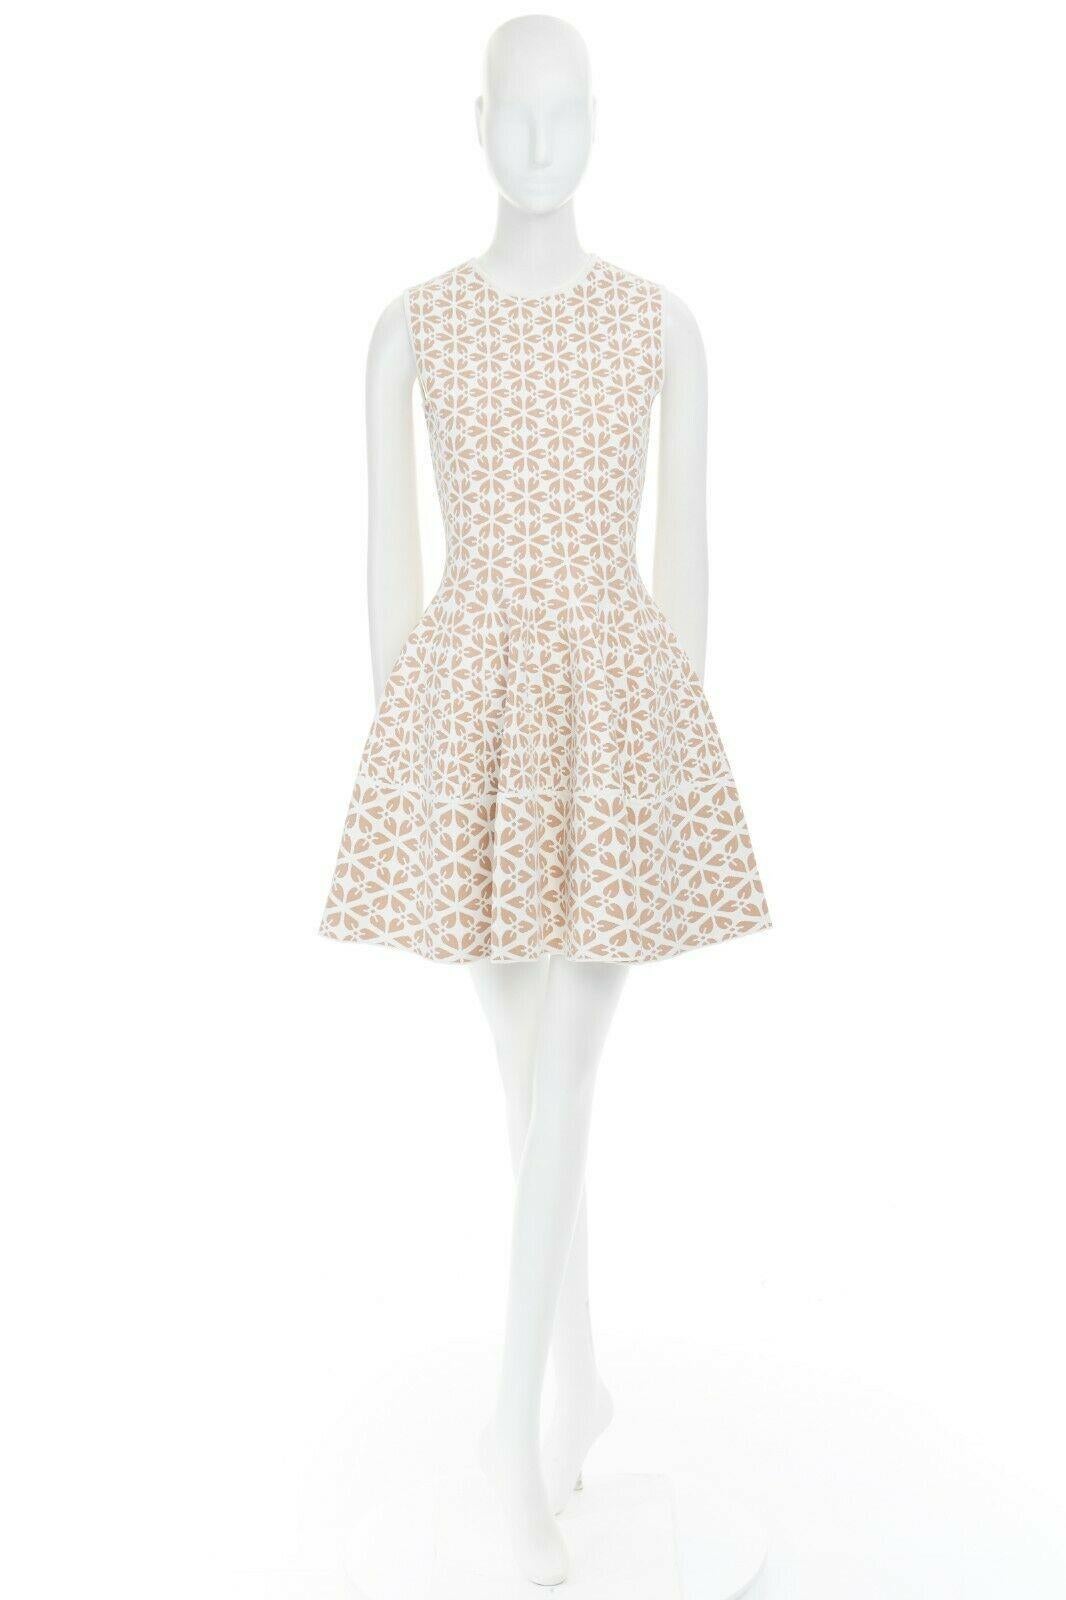 White ALEXANDER MCQUEEN white nude geomtric leaf pattern jacquard fit flare dress M